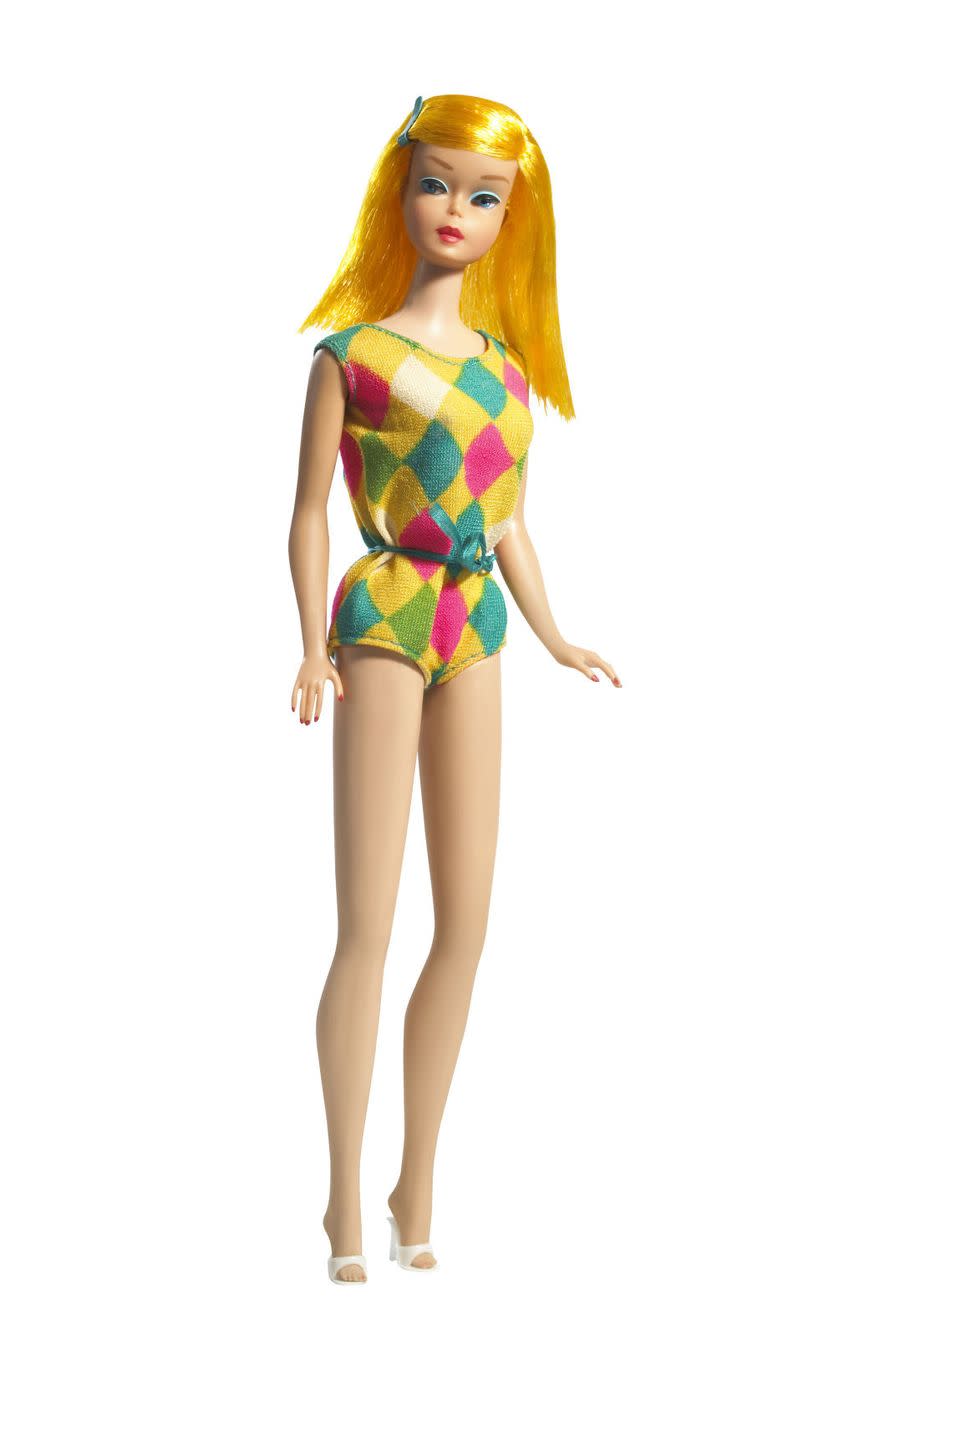 Doll, Barbie, Toy, Clothing, Wig, Fashion design, Fictional character, 